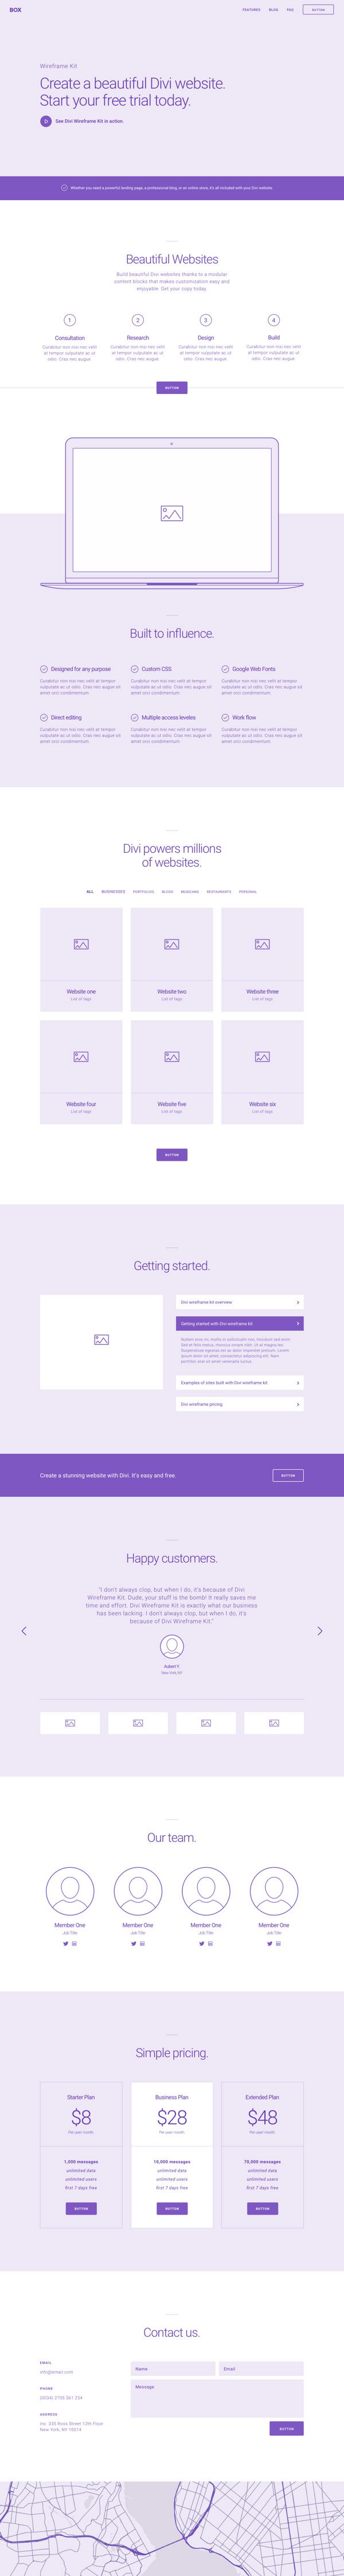 divi-100-wireframe-layout-kit-vol-2-00_layout_example_2-1